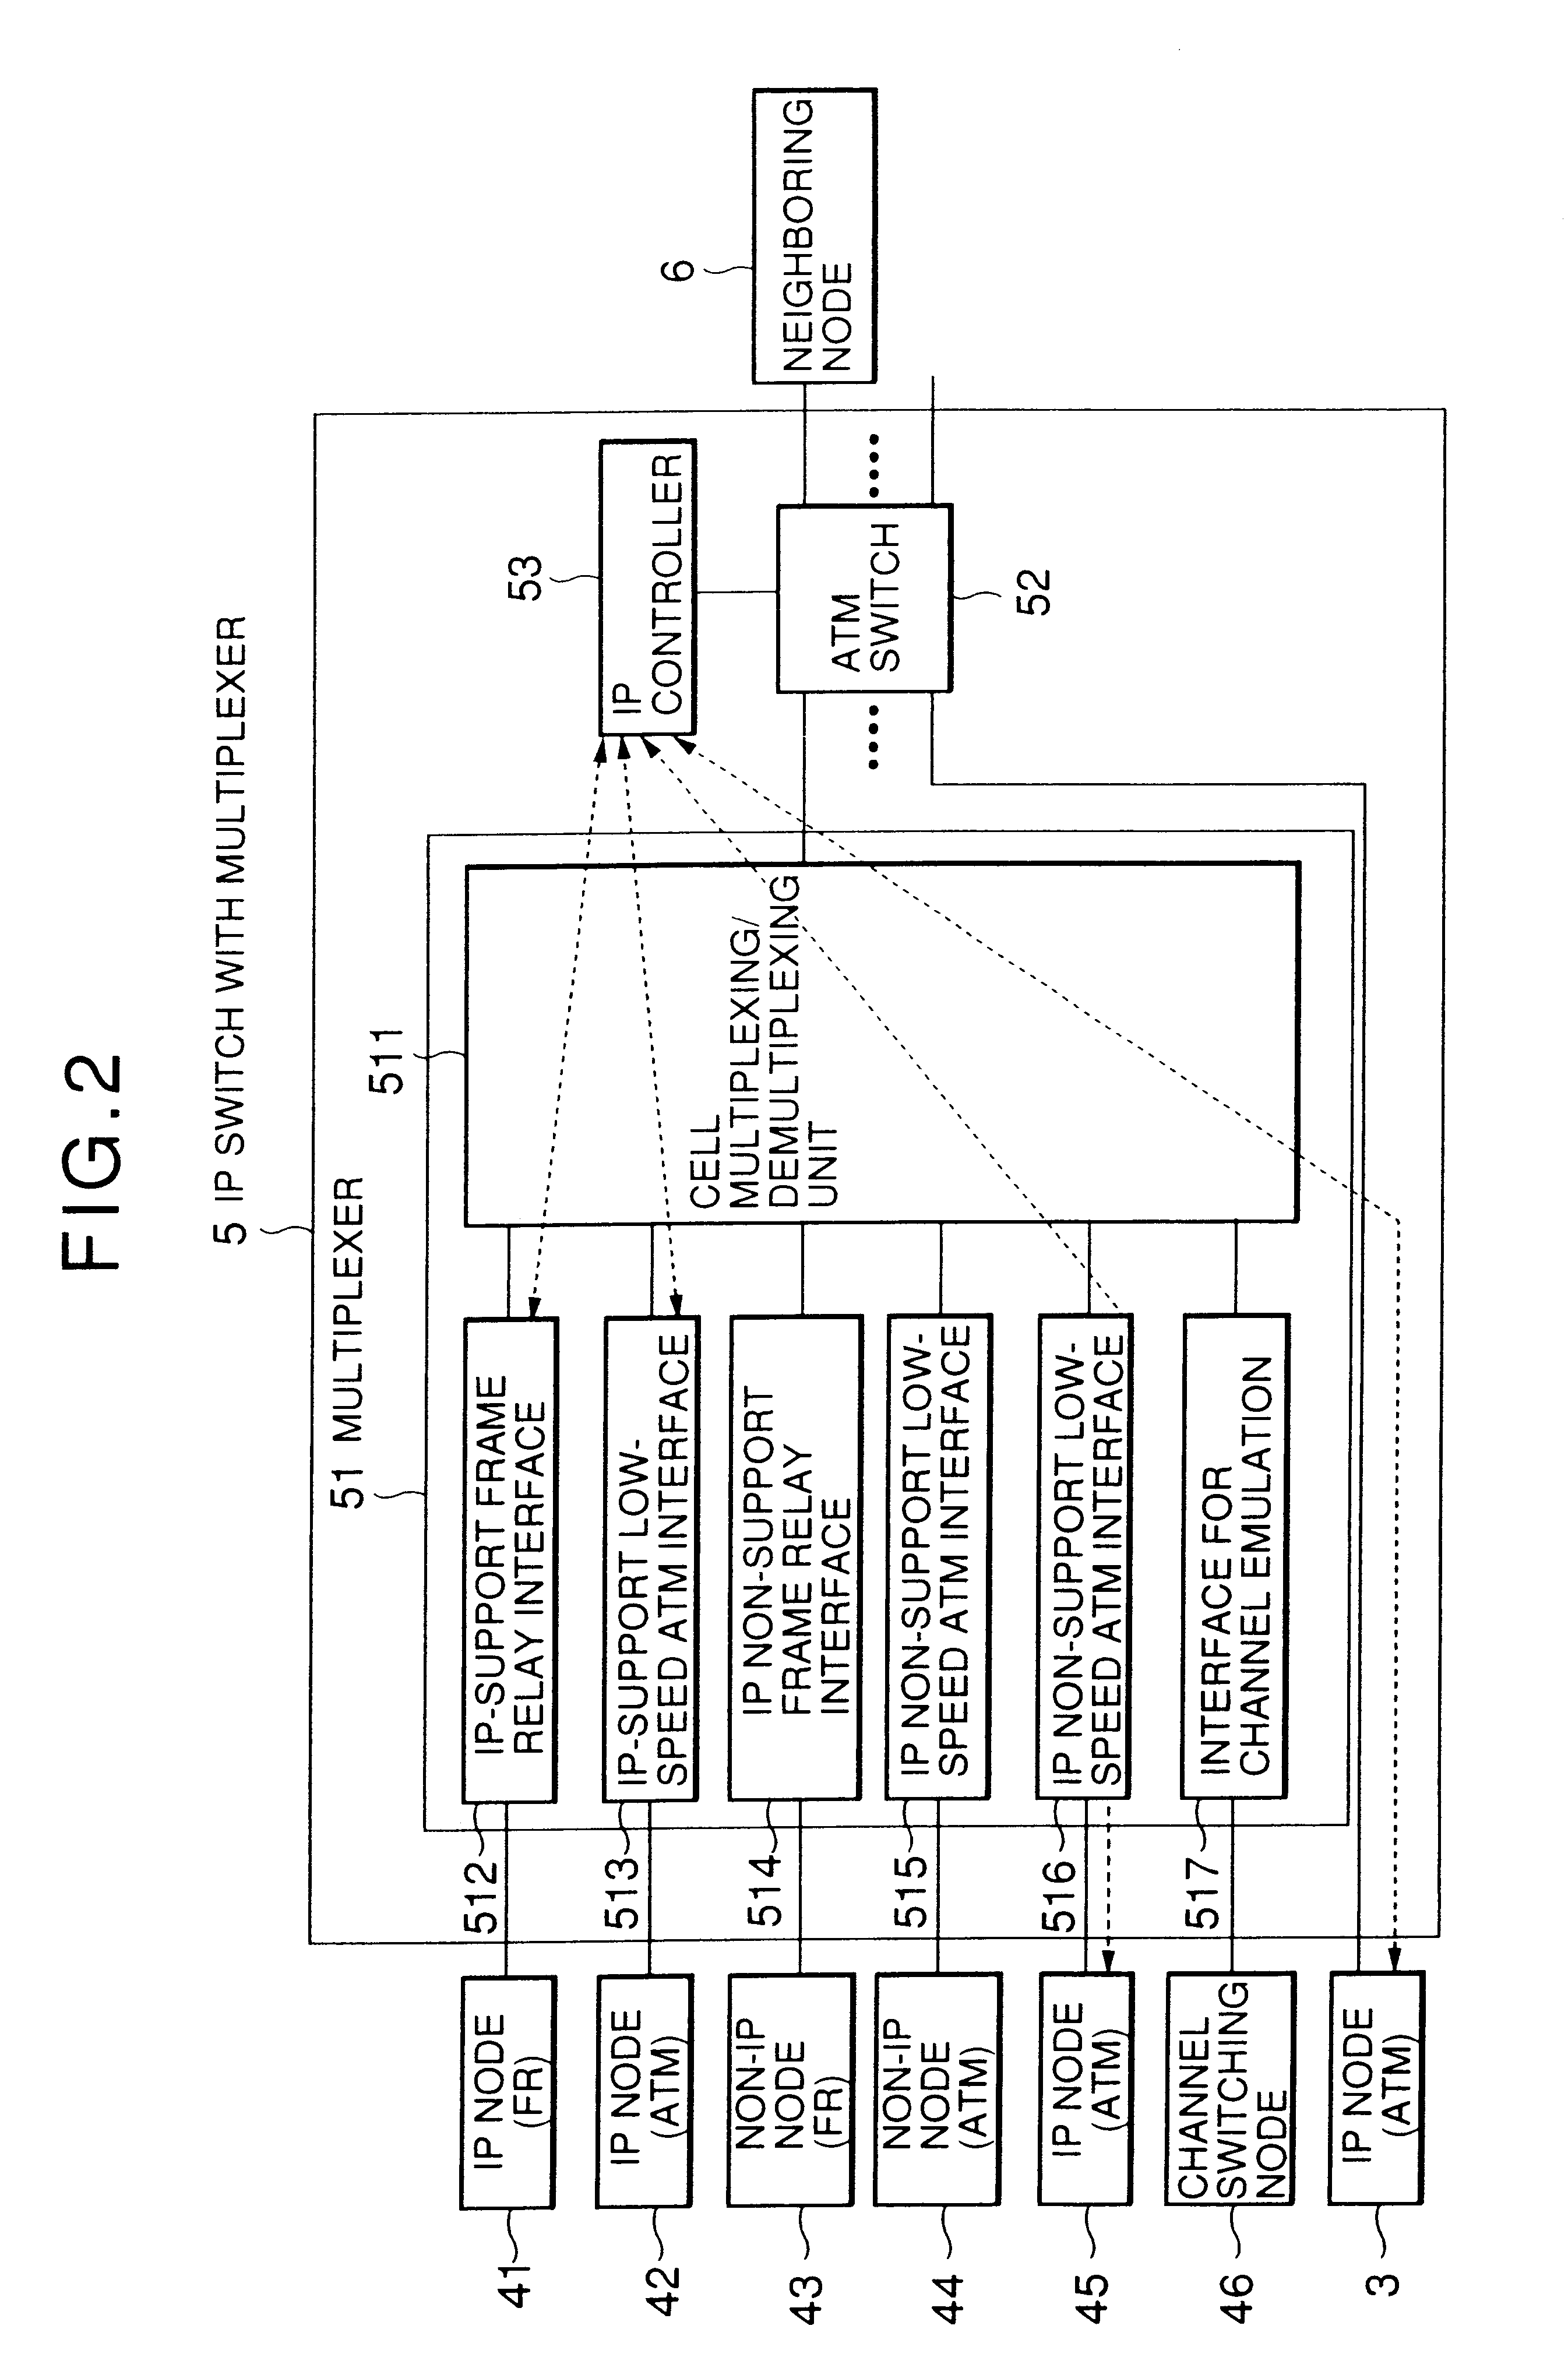 Router apparatus using ATM switch